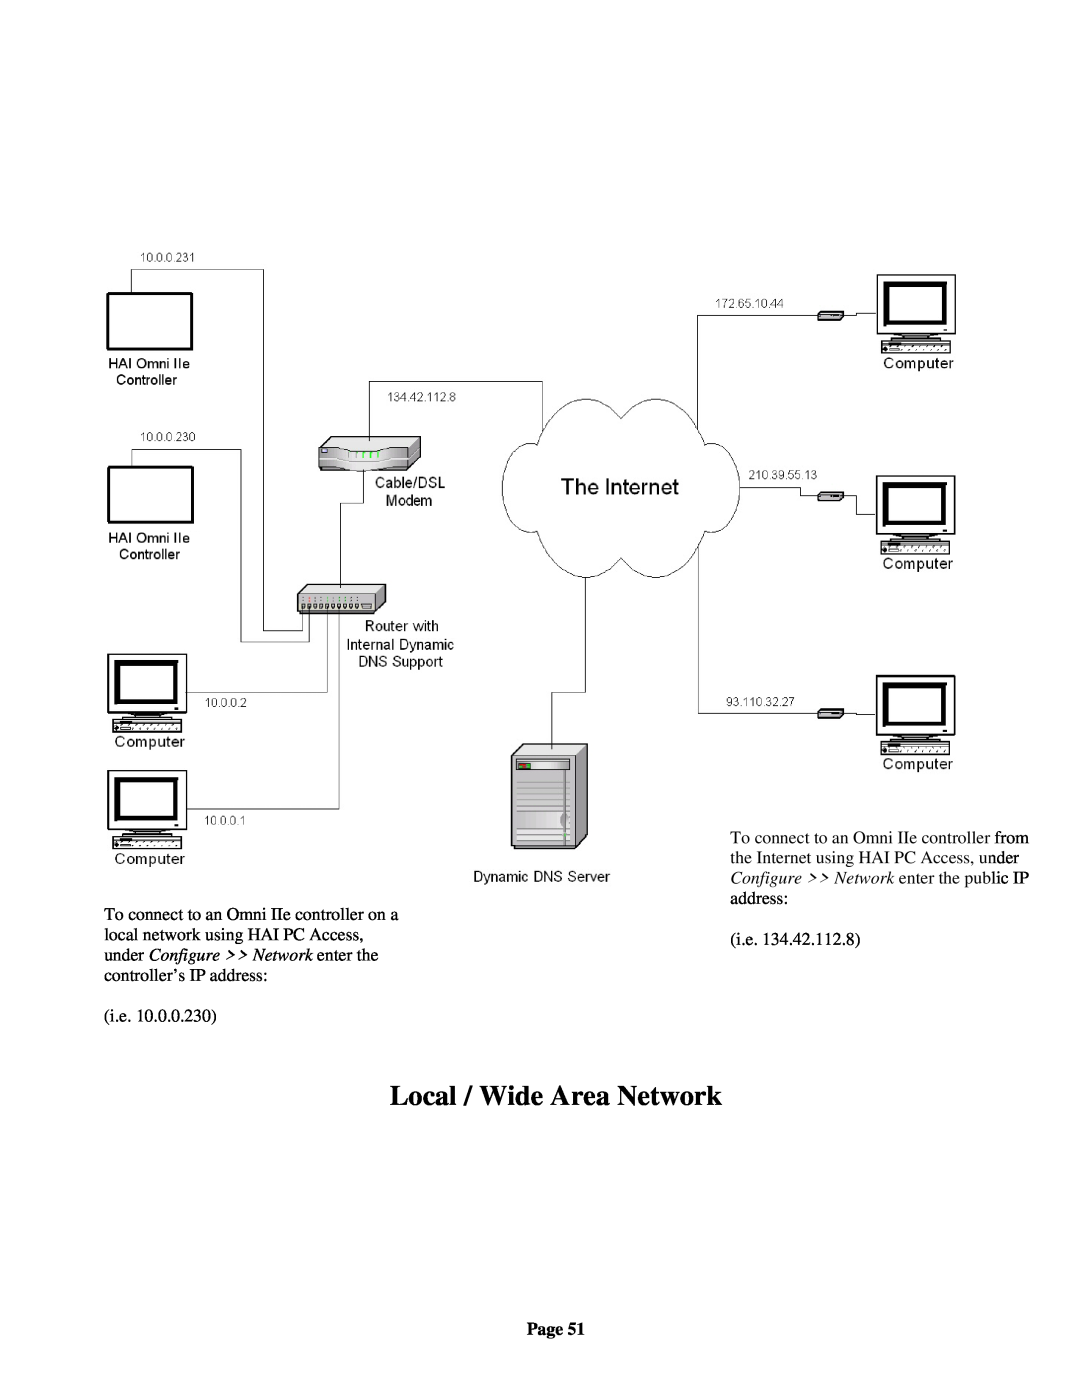 Home Automation INC. Omni IIe, HOME AUTOMATION owner manual Local / Wide Area Network, i.e, Page 